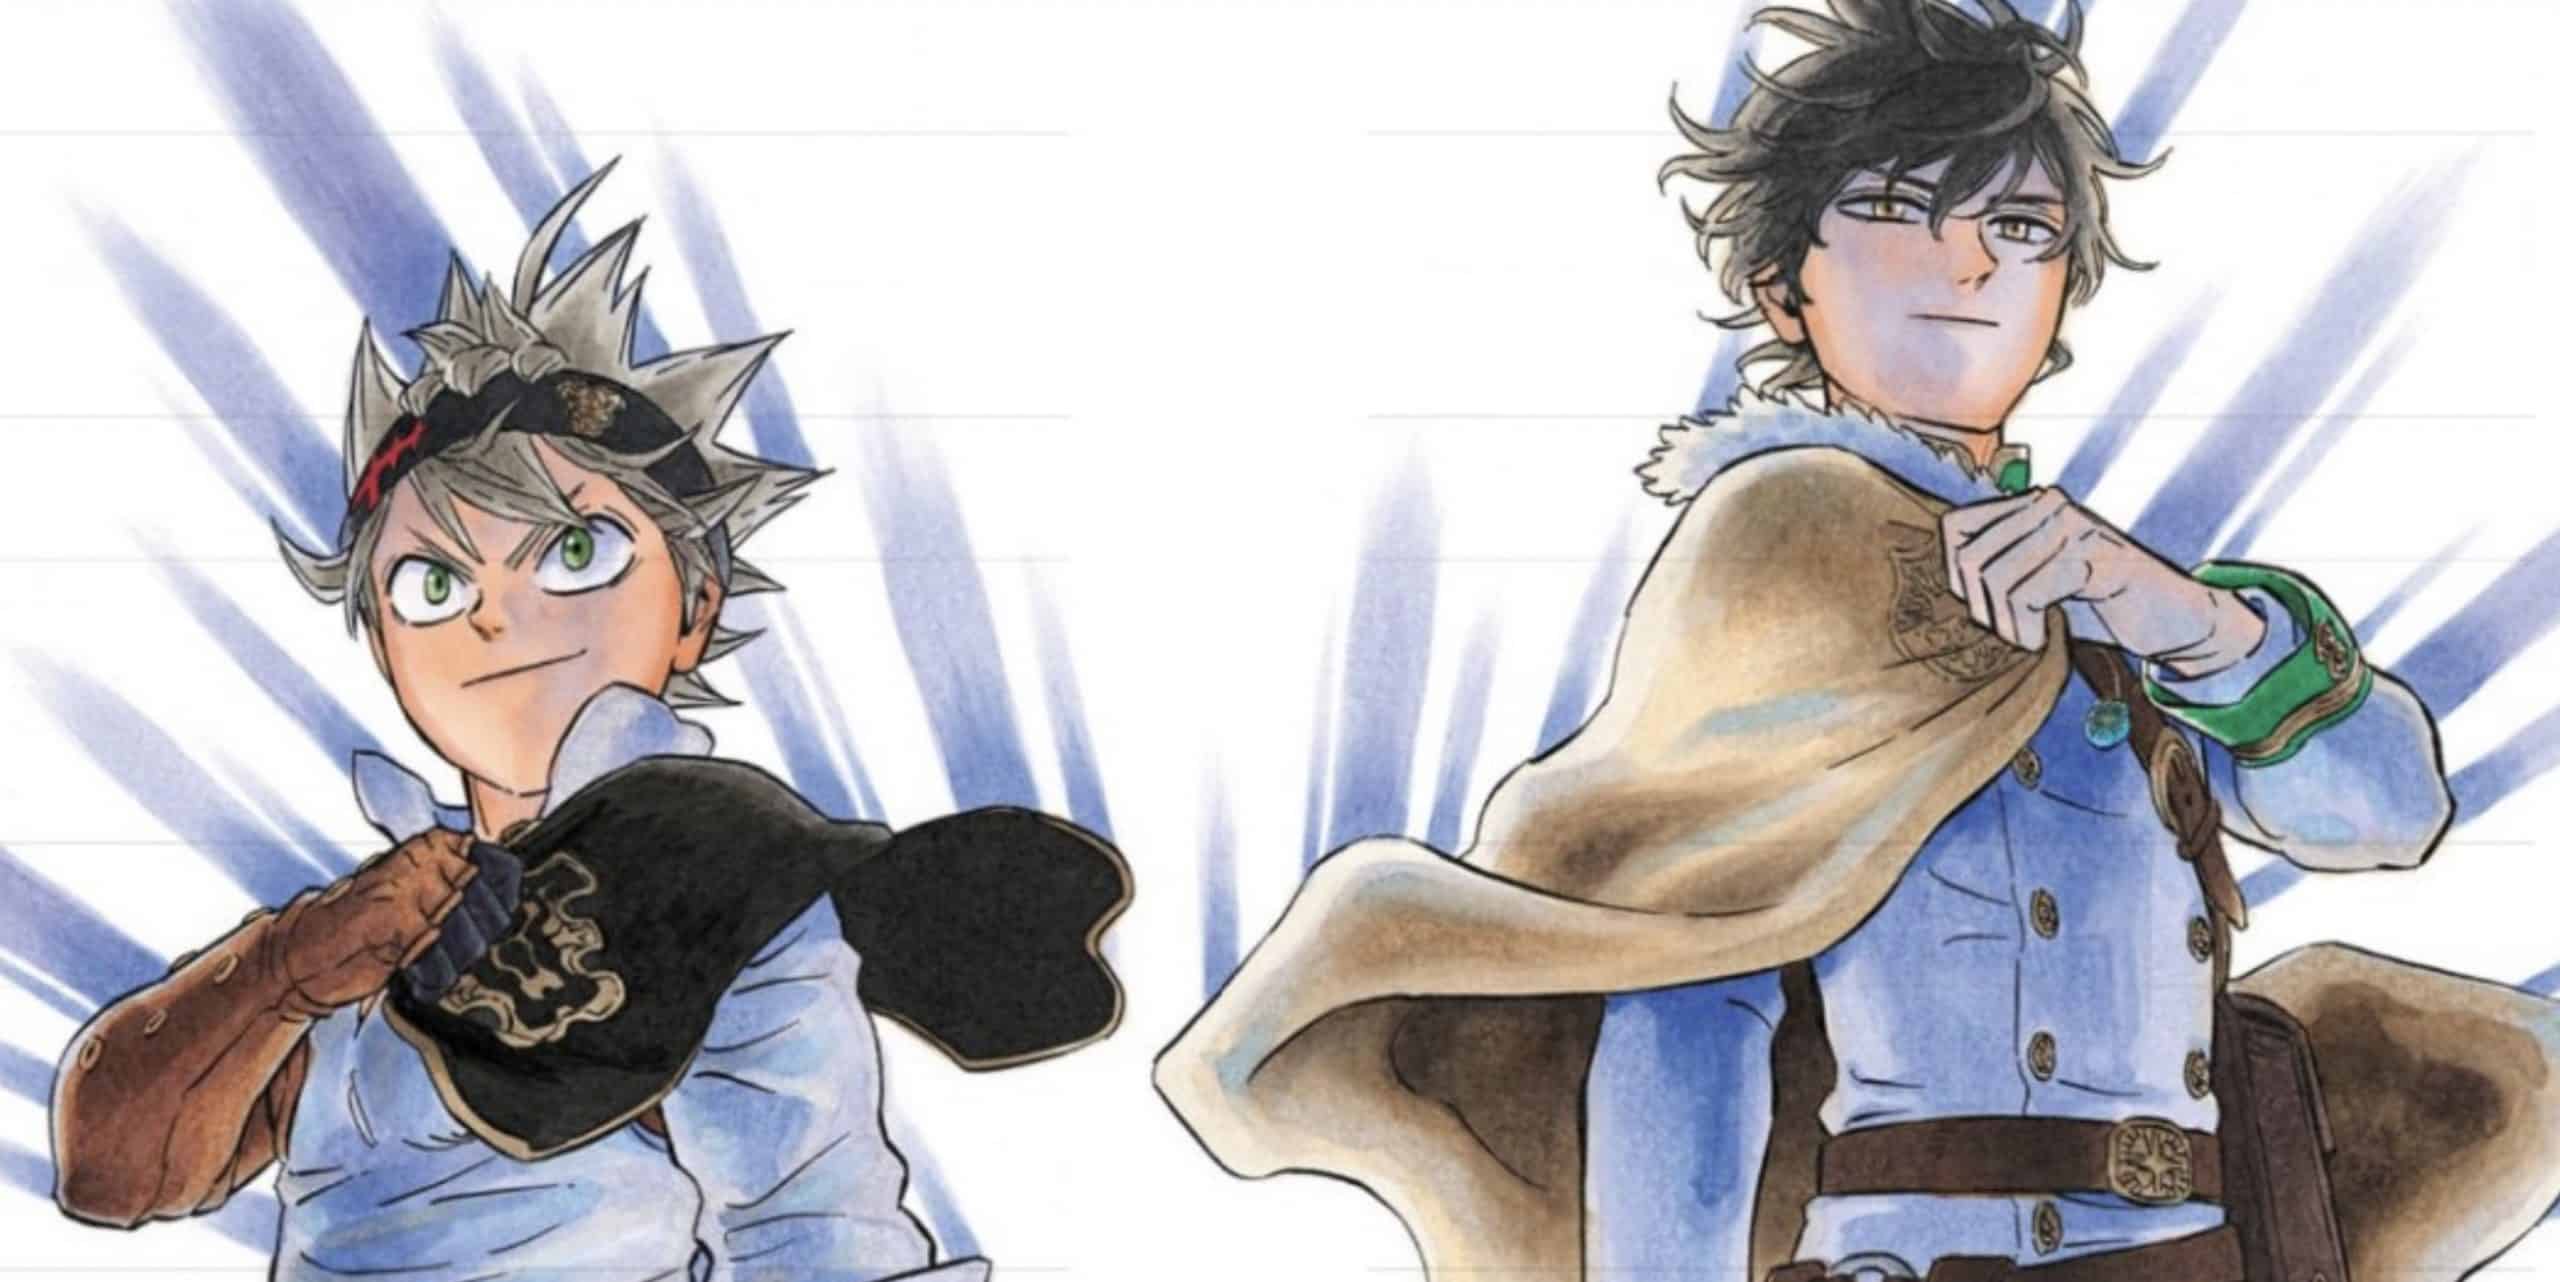 Black Clover Chapter 368 release date